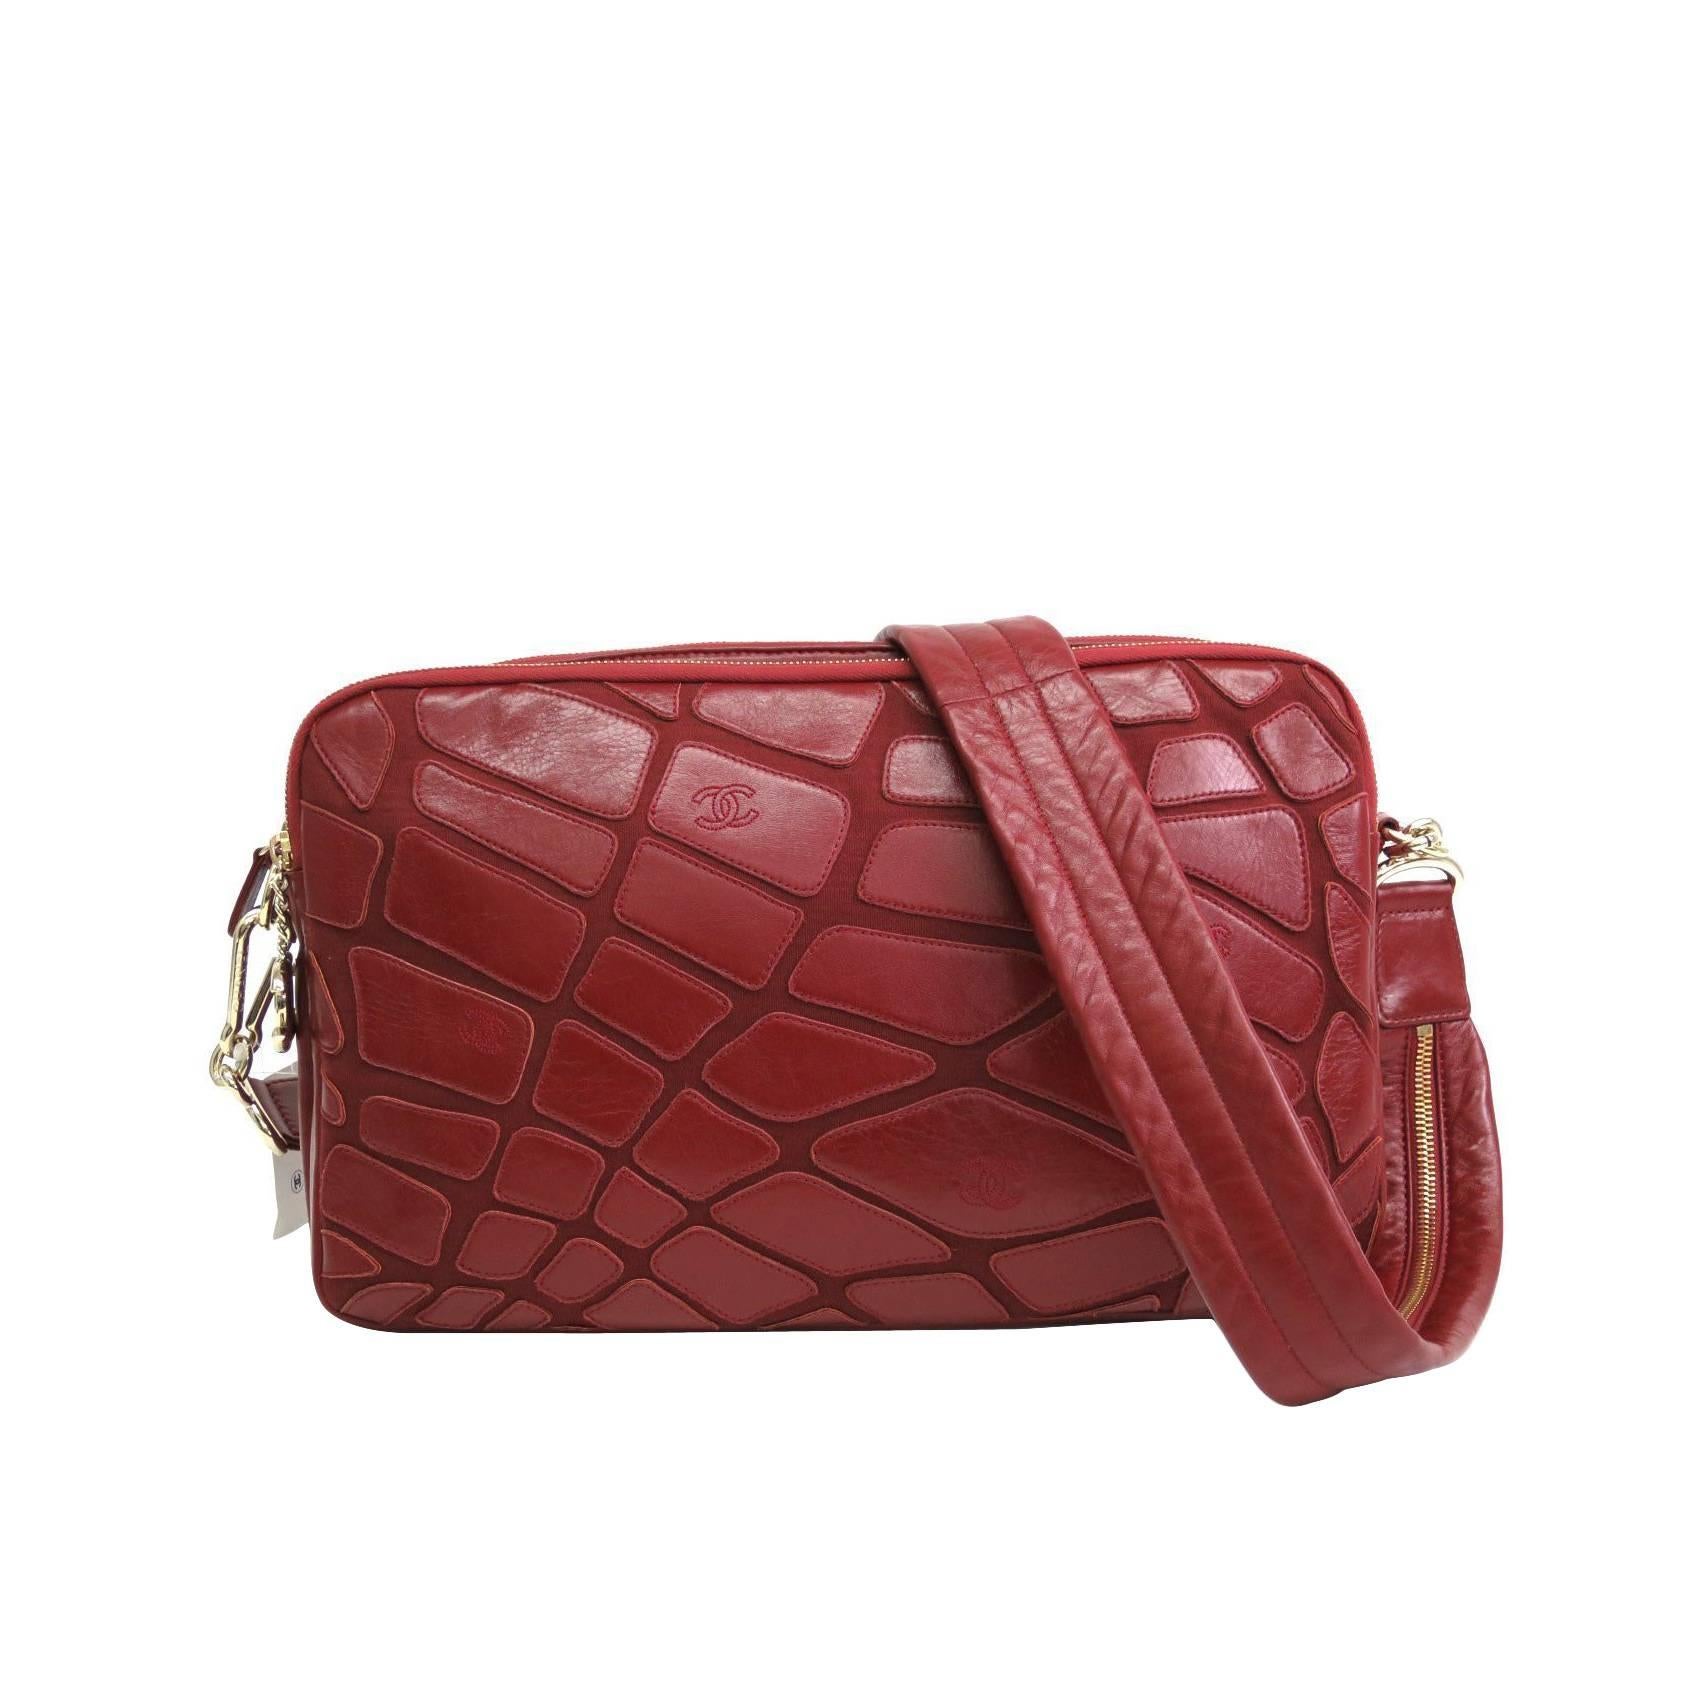 Chanel Red Lambskin Leather & Jersey Patchwork Crossbody Shoulder Bag